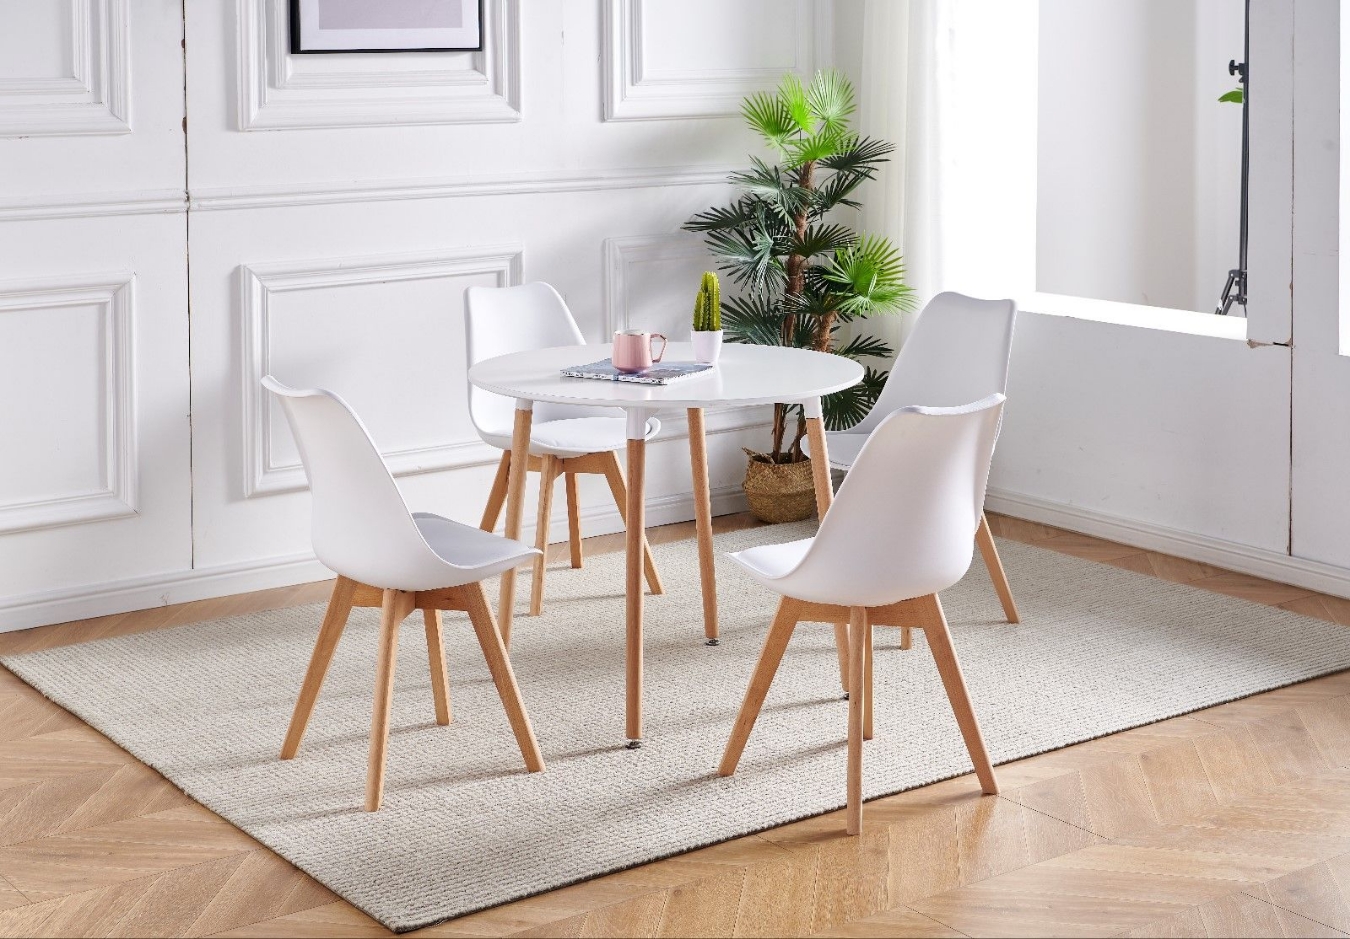 Our Set of 4 Padded Replica Oliver Dining Chairs are great value for your home.